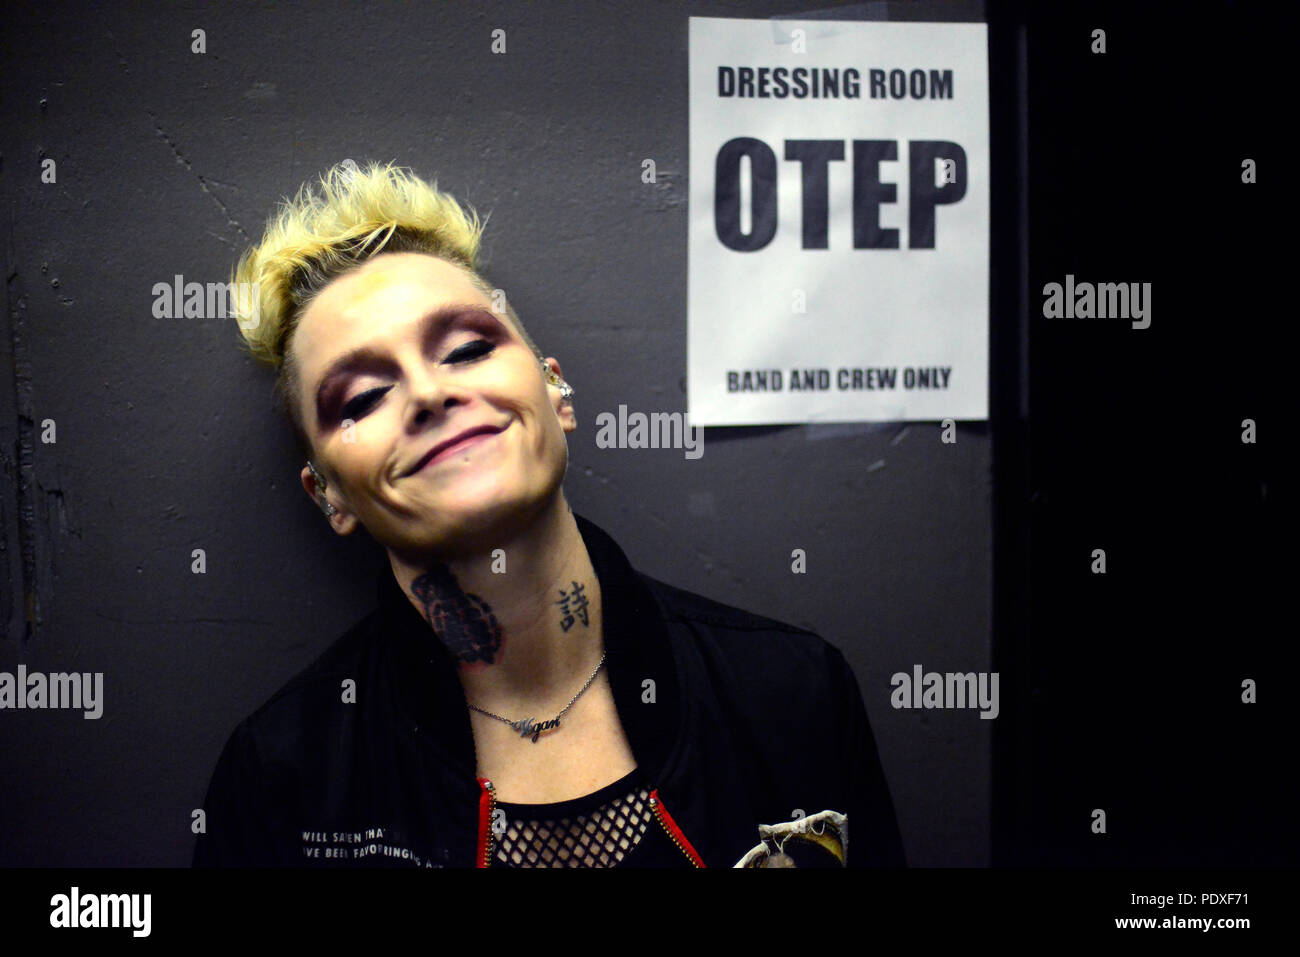 West Hollywood, CA, USA. 8th Aug, 2018. Musician - OTEP SHANAYA lead vocalist for OTEP at The Whisky A Go Go, West Hollywood, California, USA, August 8, 2018. OTEP is a Los Angeles based heavy metal band that integrates rap metal, new metal, alternative metal into their sound. OTEP is an anagram for poet. Otep Shamaya descibes the bands sound as, ''art house nu-metal.'' .Image Credit cr Scott Mitchell/ZUMA Press Credit: Scott Mitchell/ZUMA Wire/Alamy Live News Stock Photo